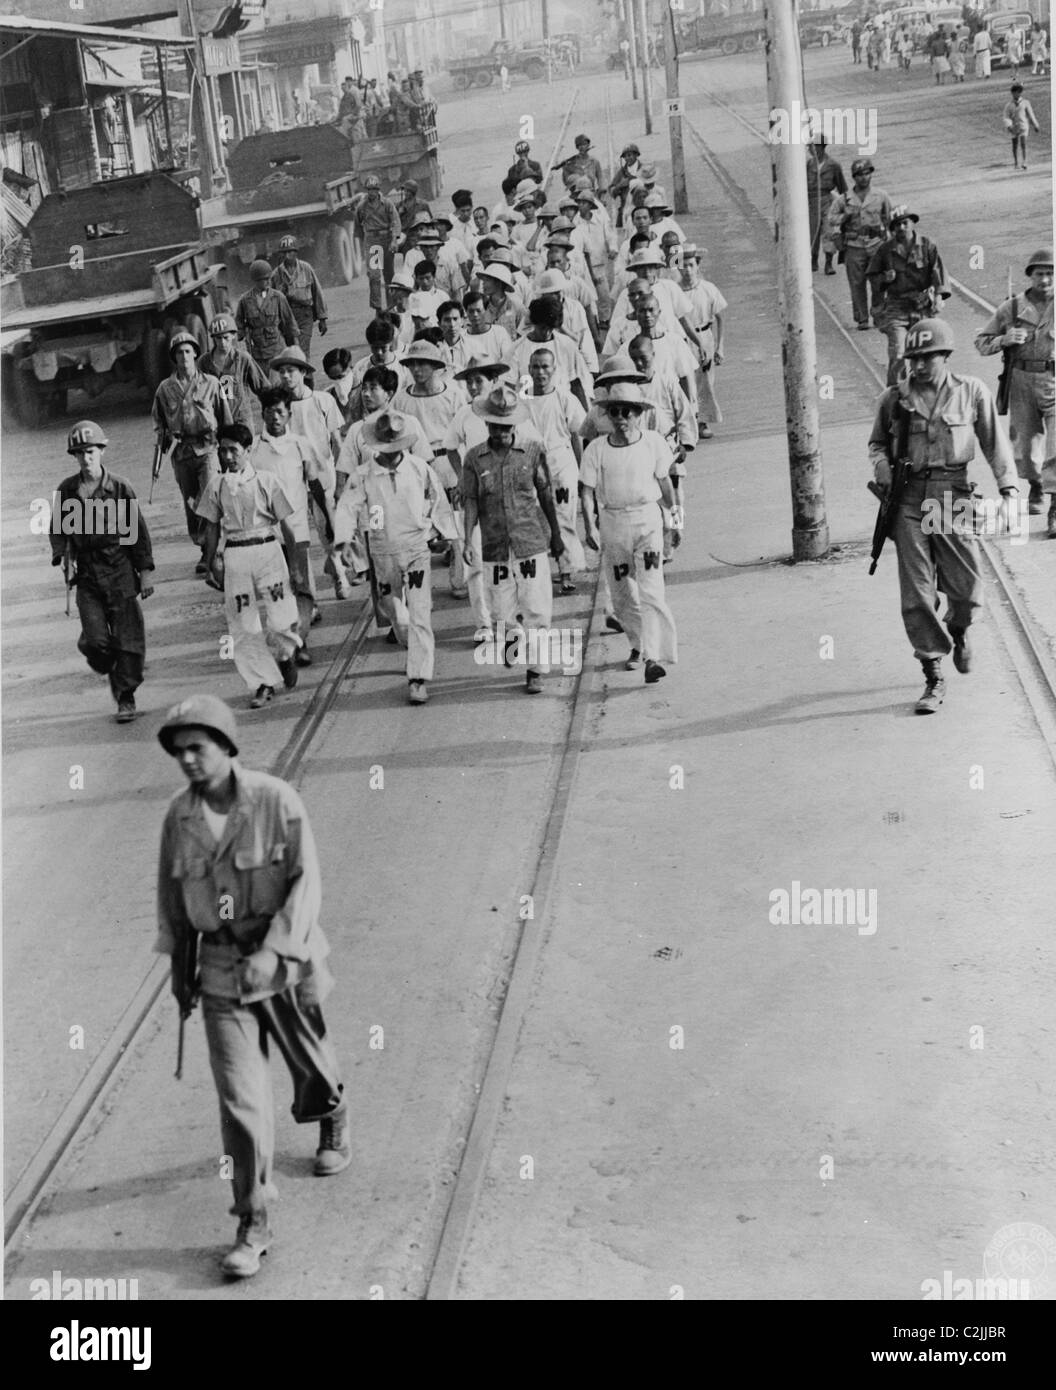 WWII 8X10 PHOTOGRAPH US ARMY  MANILA PHILIPPINES 1945 CAPTURED JAPANESE SOLDIER 